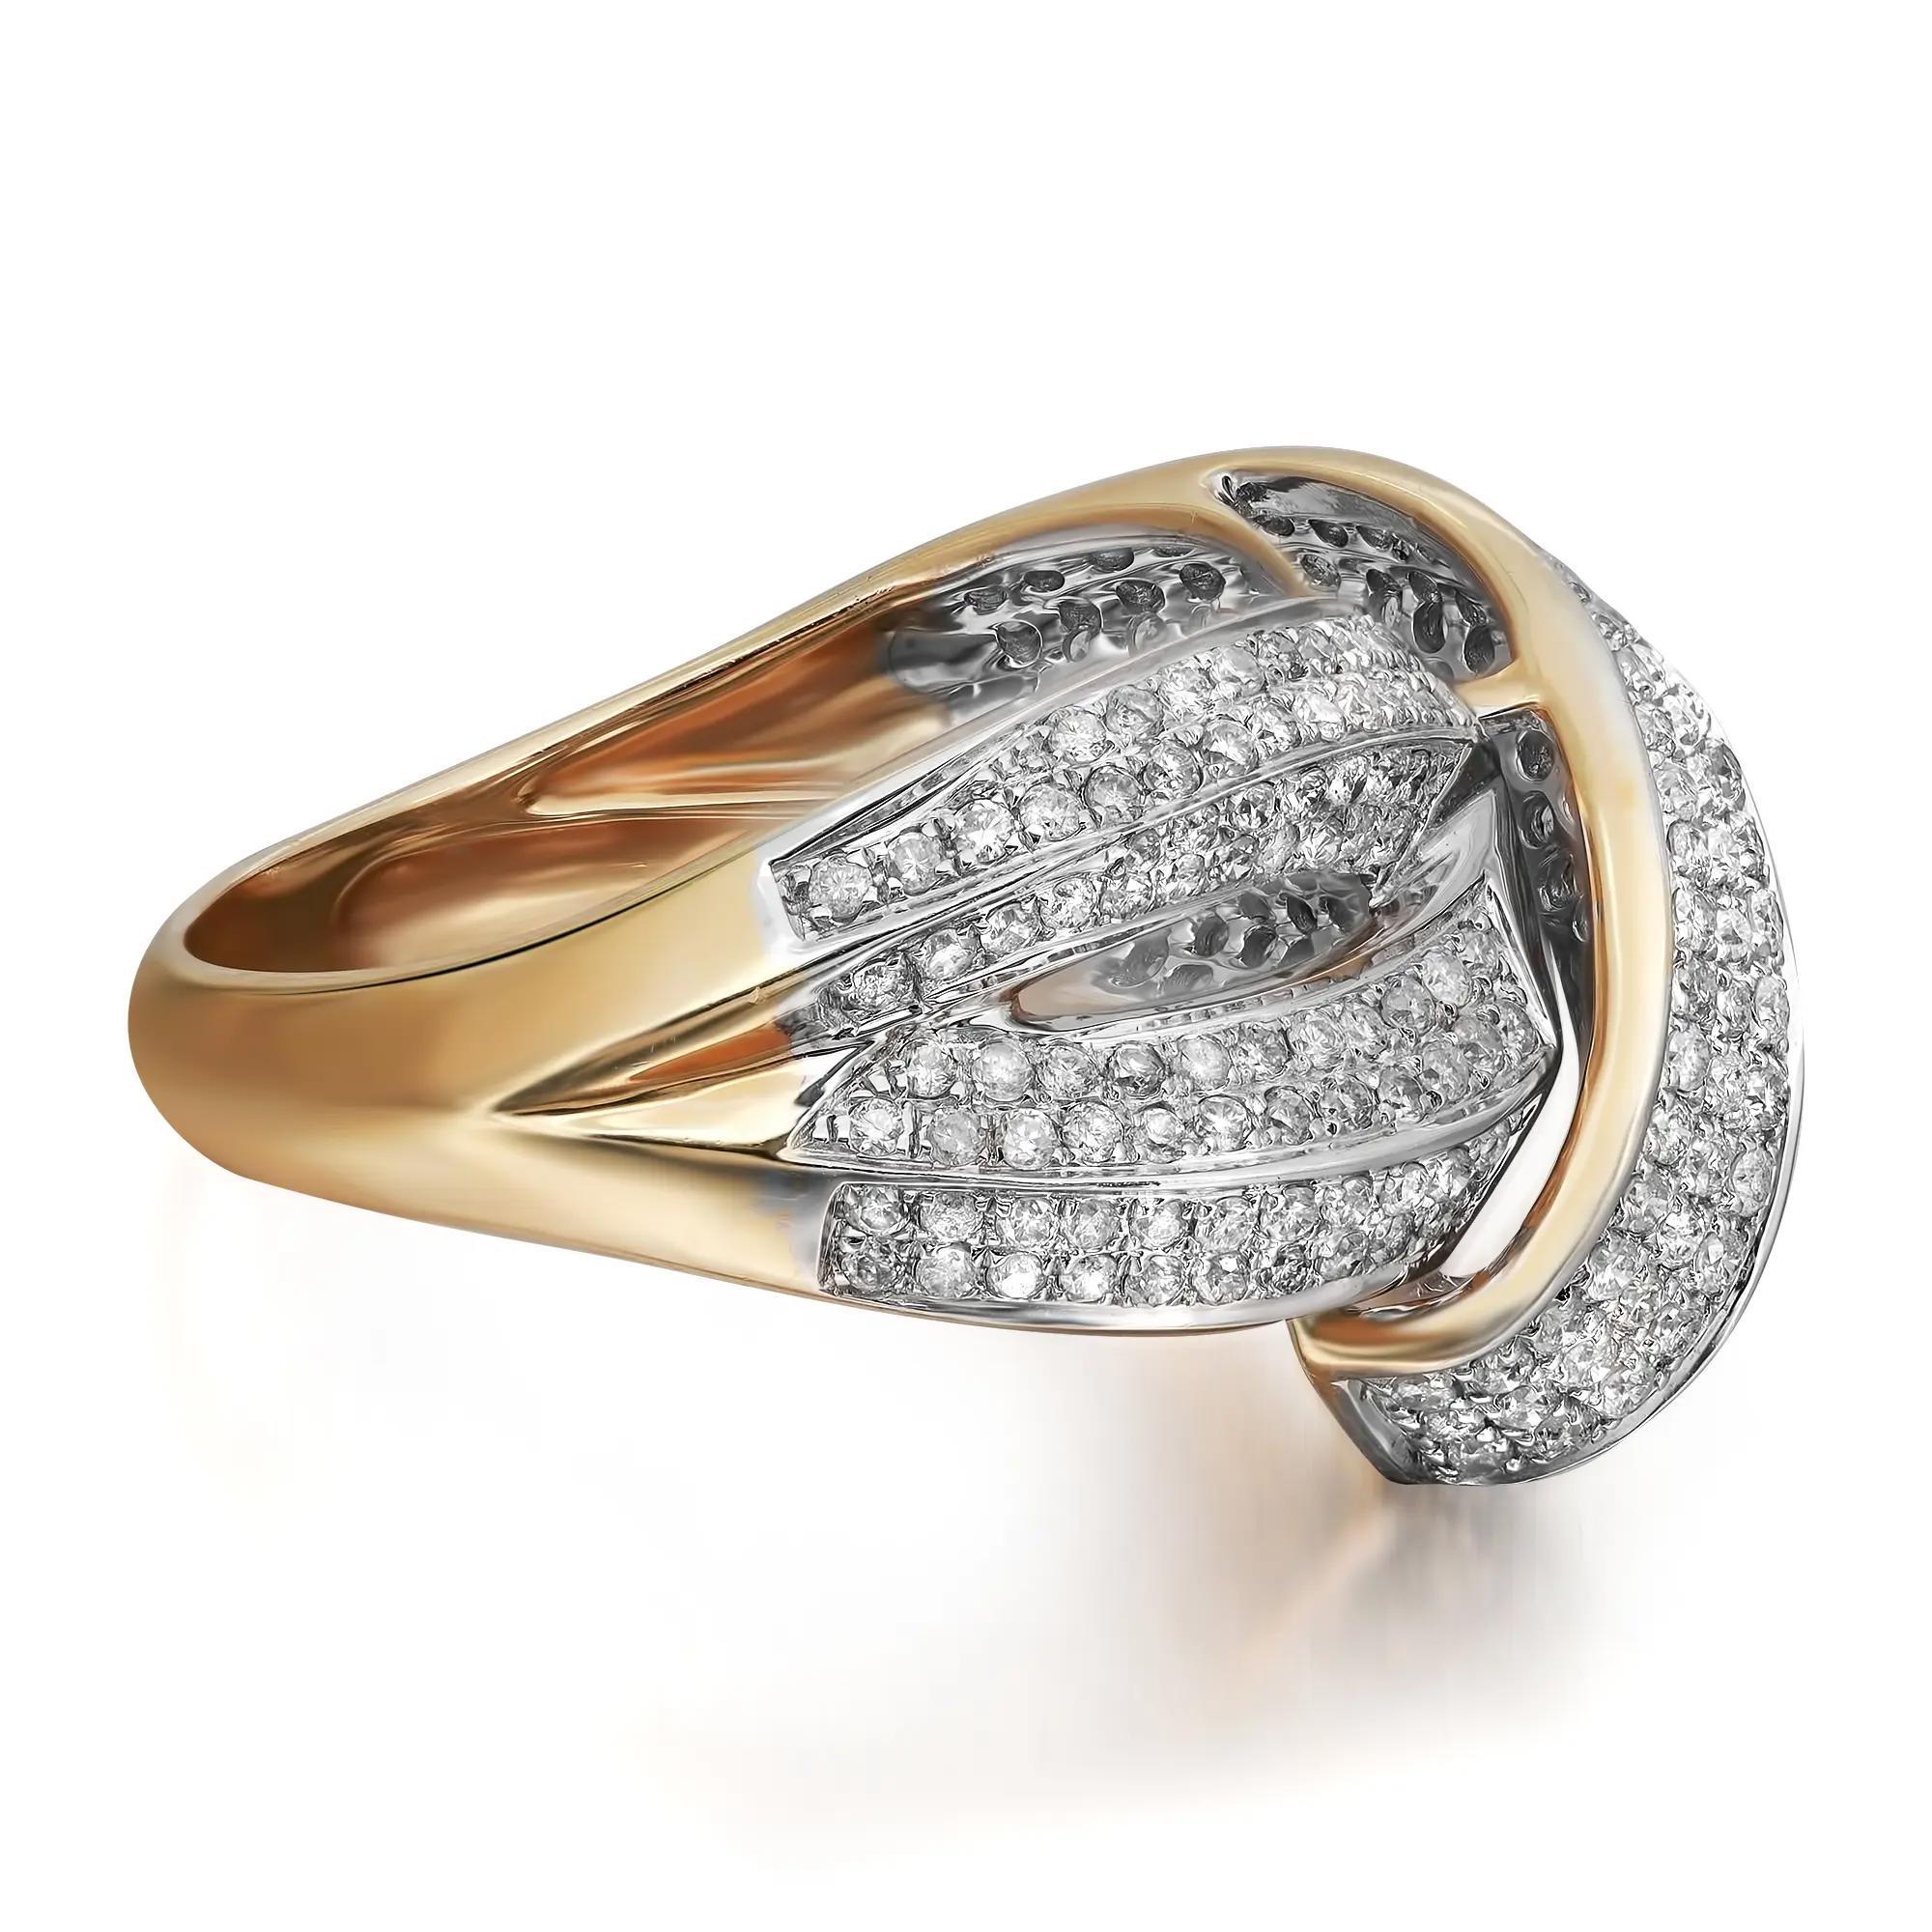 Modern 1.18Cttw Pave Set Round Cut Diamond Ladies Cocktail Ring 14K Yellow Gold SZ 7.5 For Sale